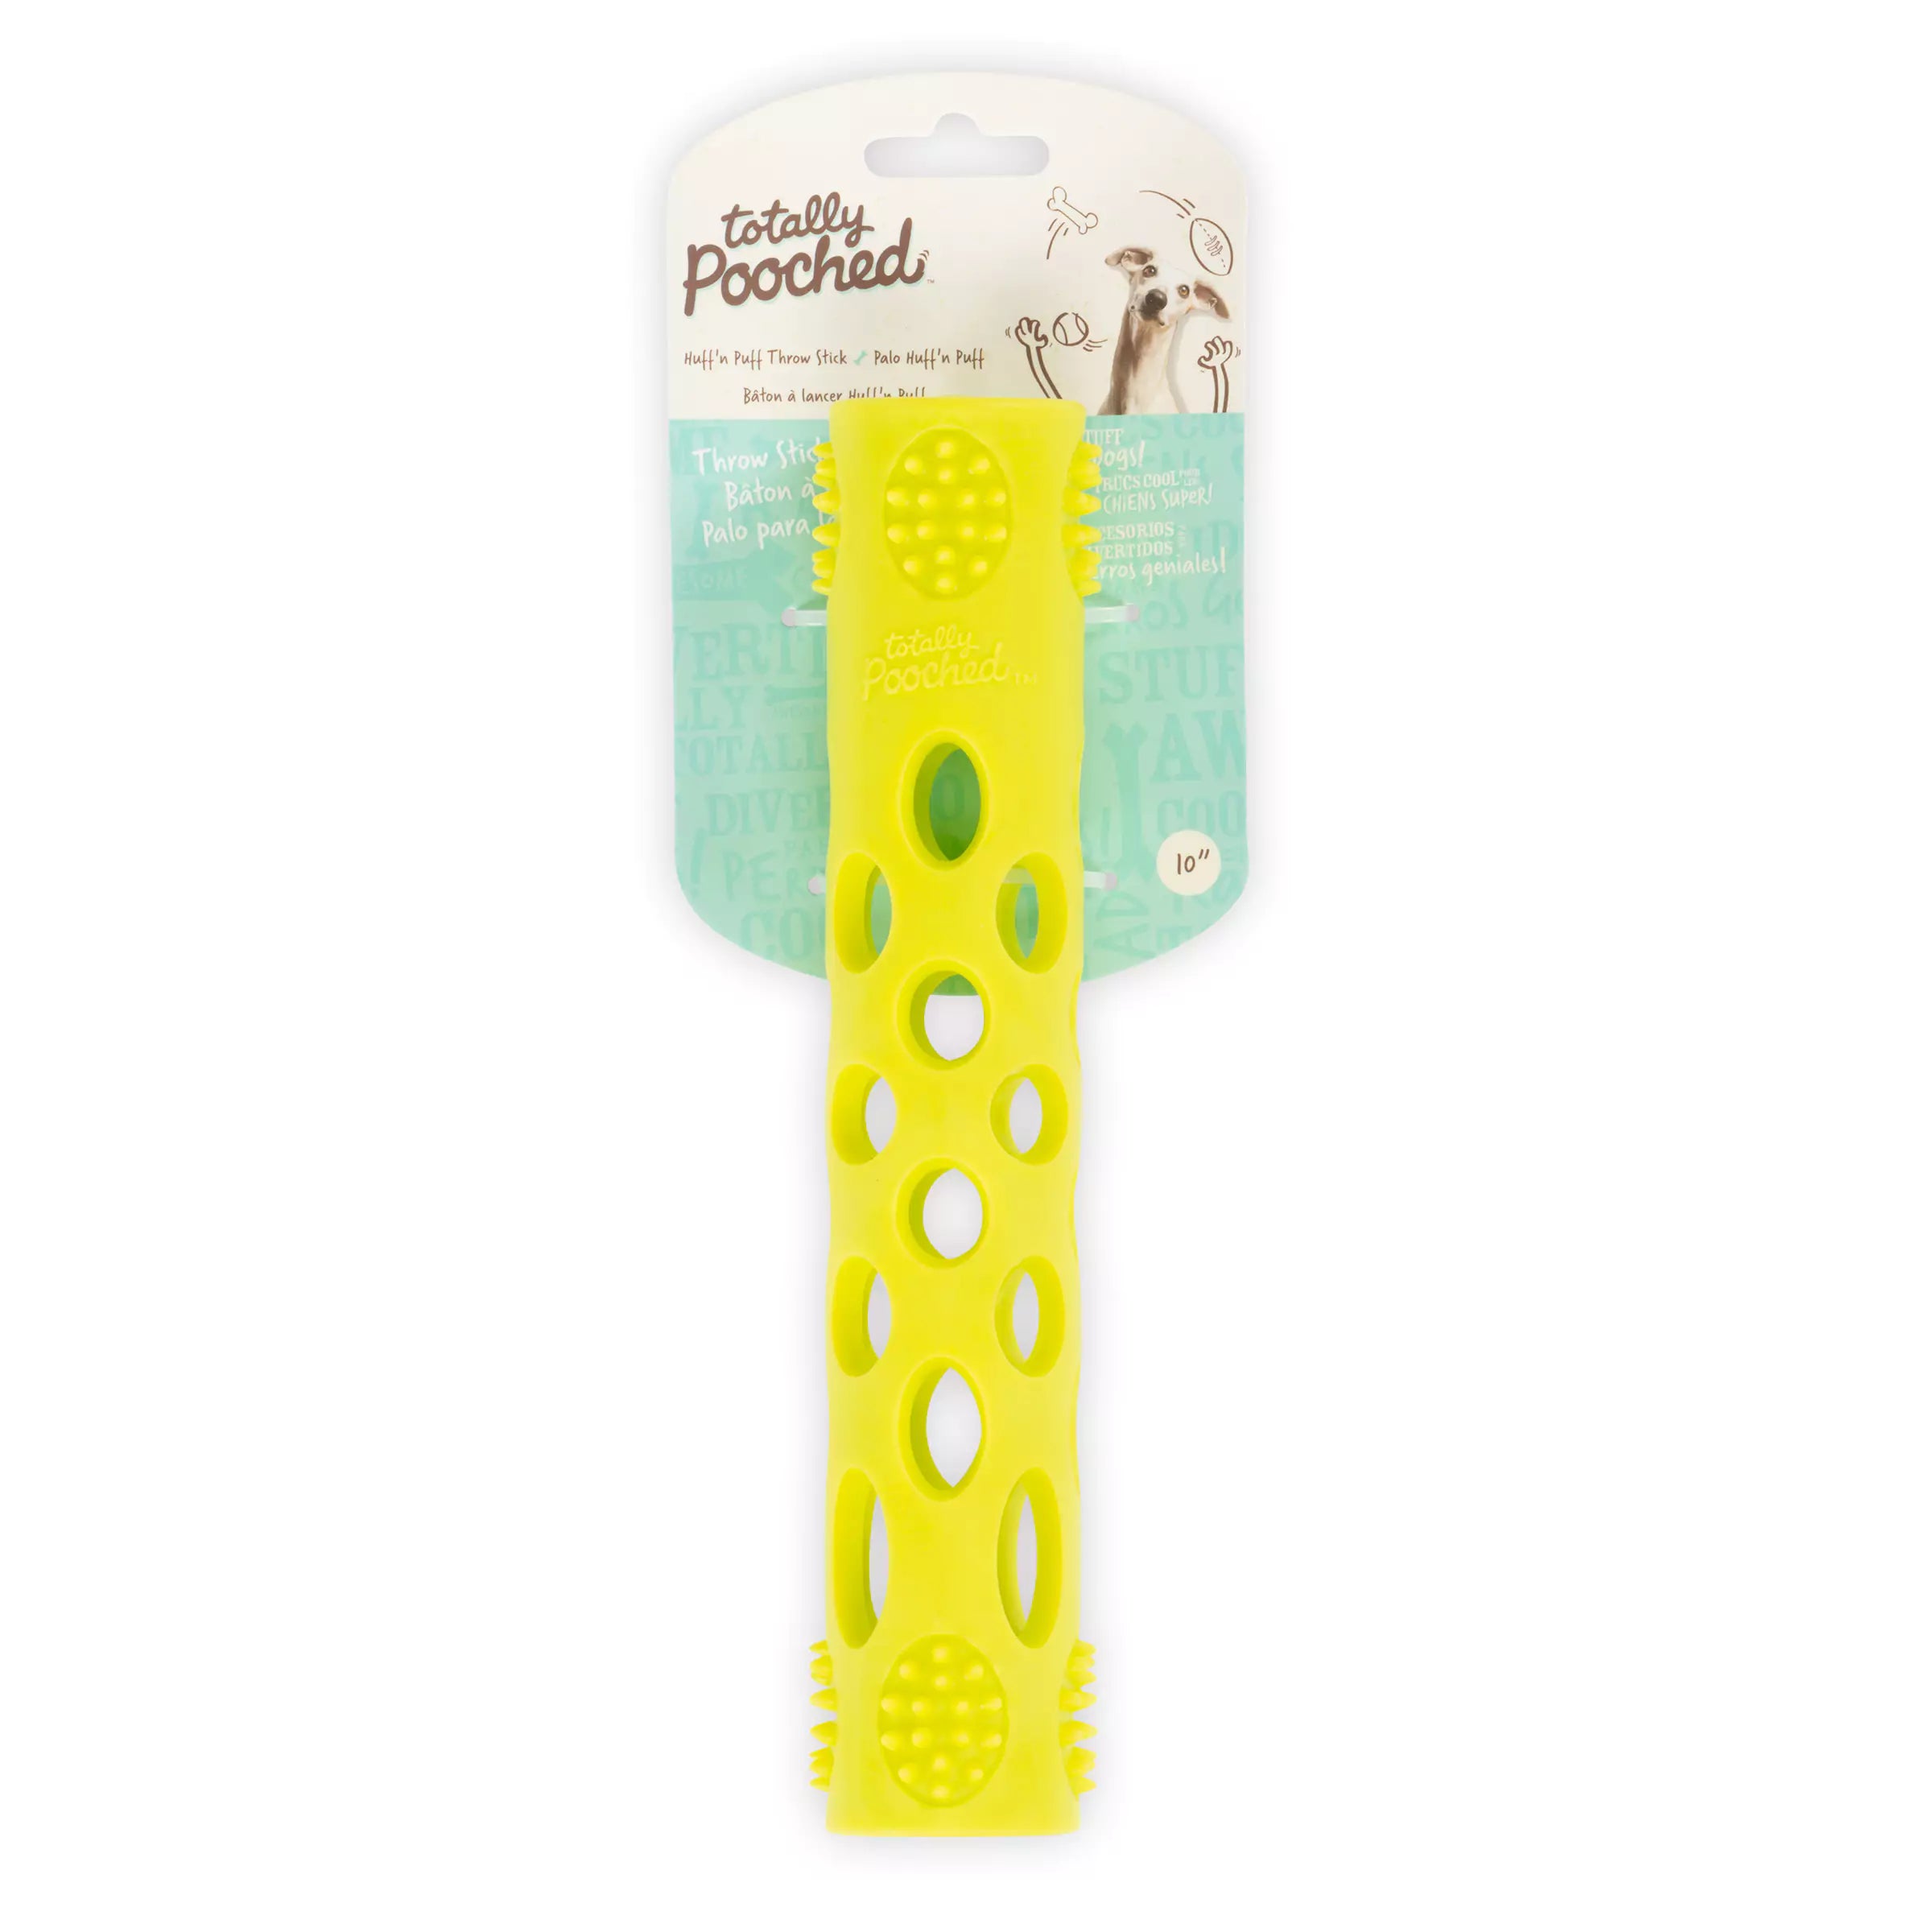 Totally Pooched | Huff'n Puff Stick Dog Toy, 10"